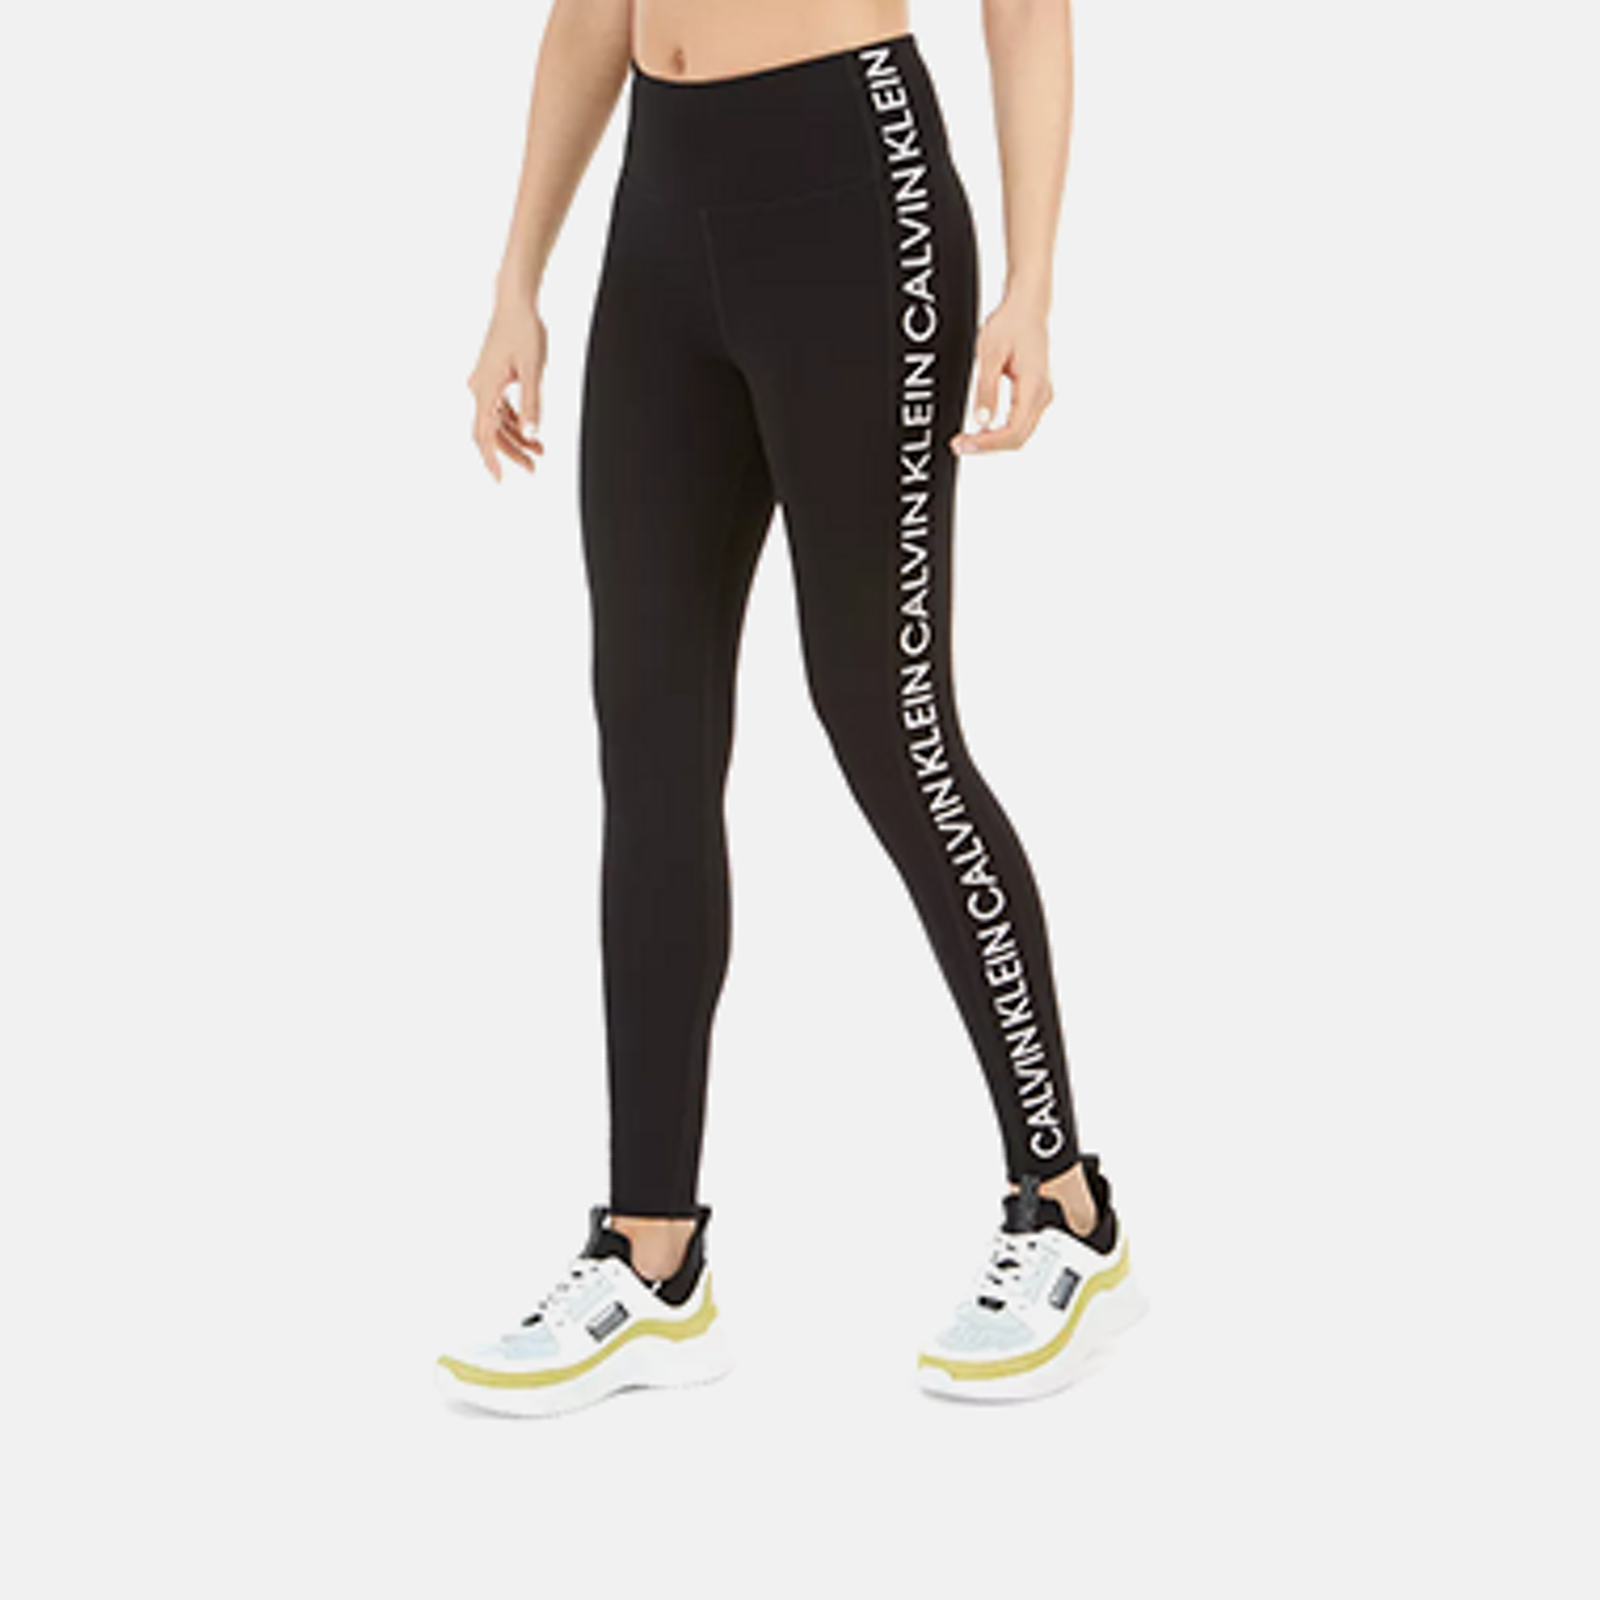 Champion Workout Clothing & Activewear for Women - Macy's